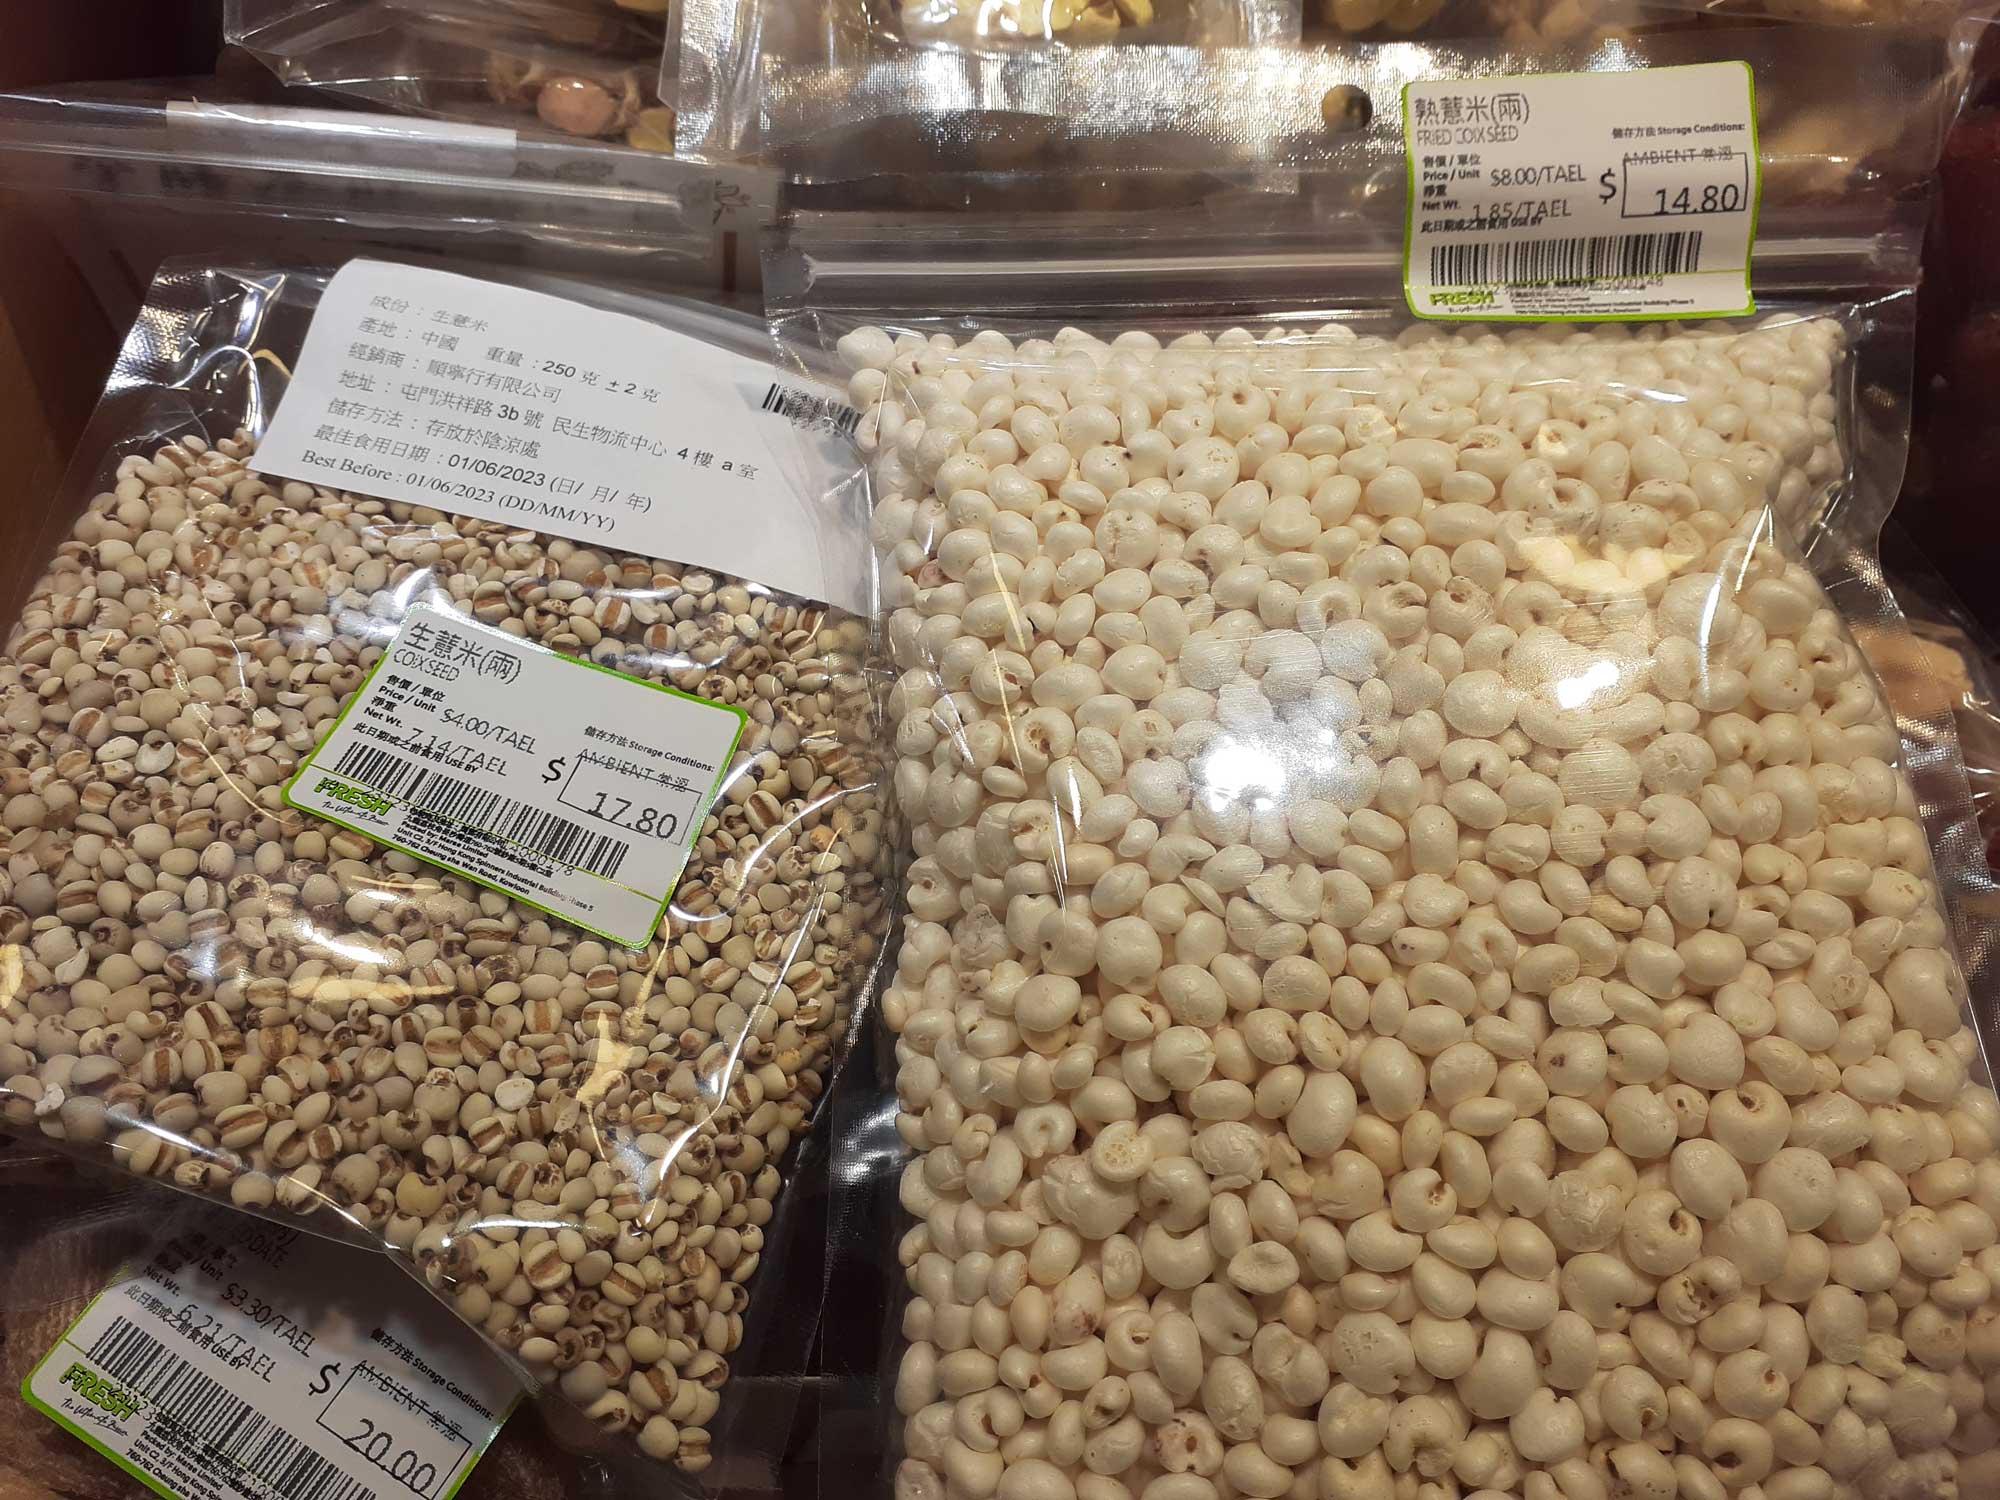 Photograph of bags of adlay grains at a market in Hong Kong. The photo shows two clear plastic bags filled with grain. The bag on the left has smaller, beige grains and is labeled as "coix seed." The bag on the right has larger white grains and is labeled as "fried coix seed."